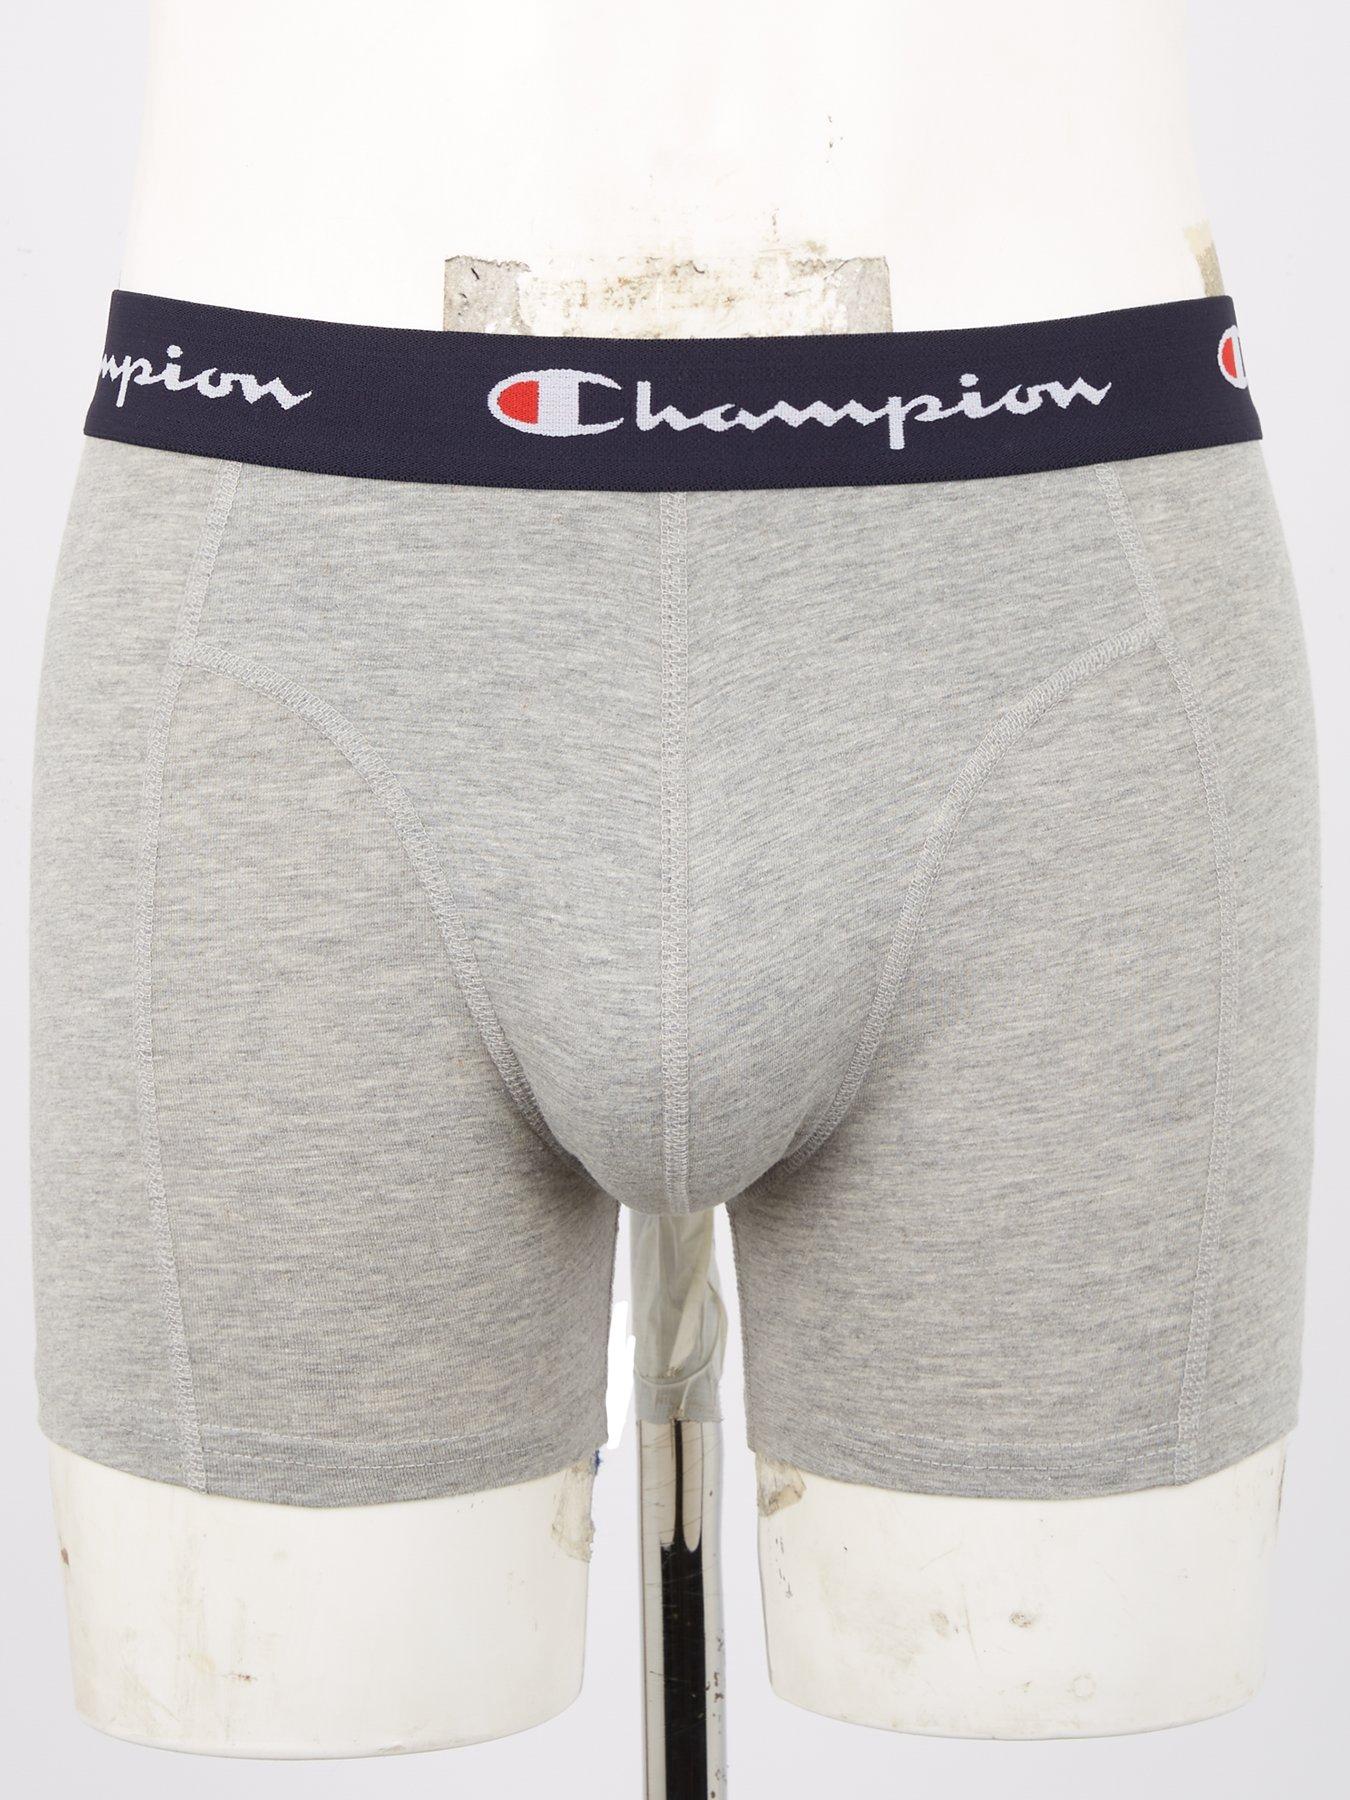 Champion 2 pack of Boxers - Grey